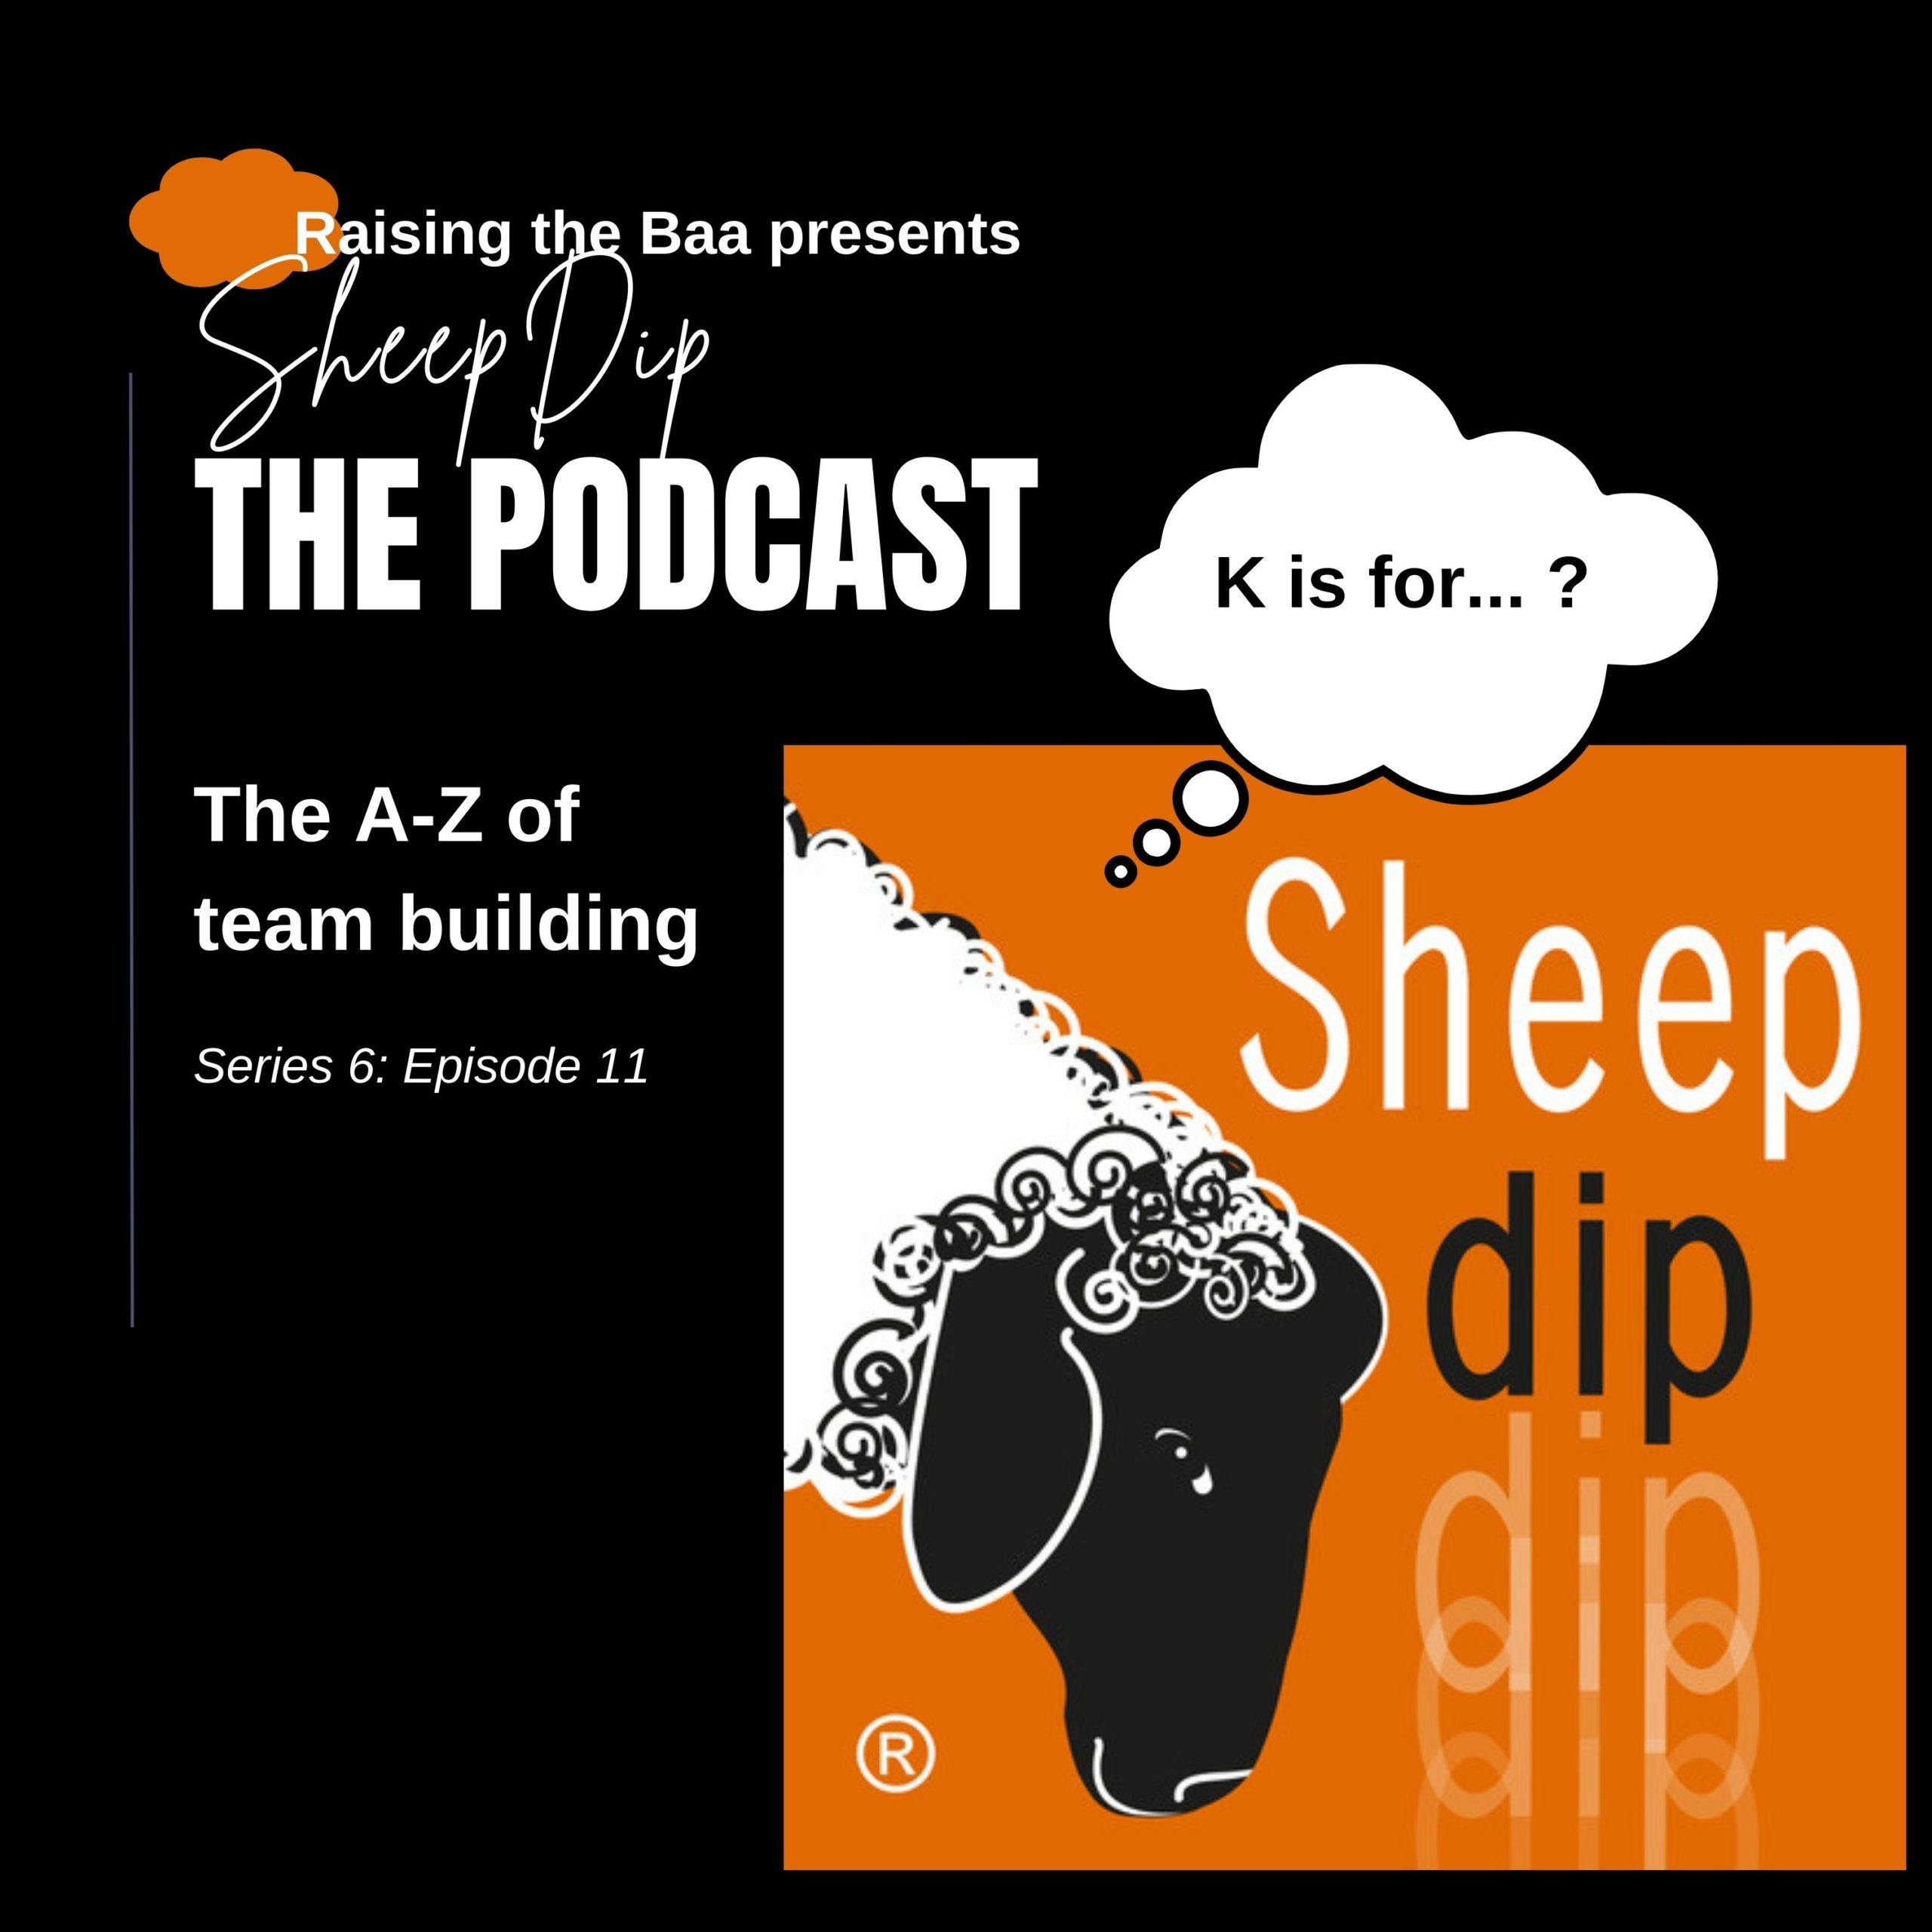 In team building, K is for ...? - Podcast cover 2 (4)